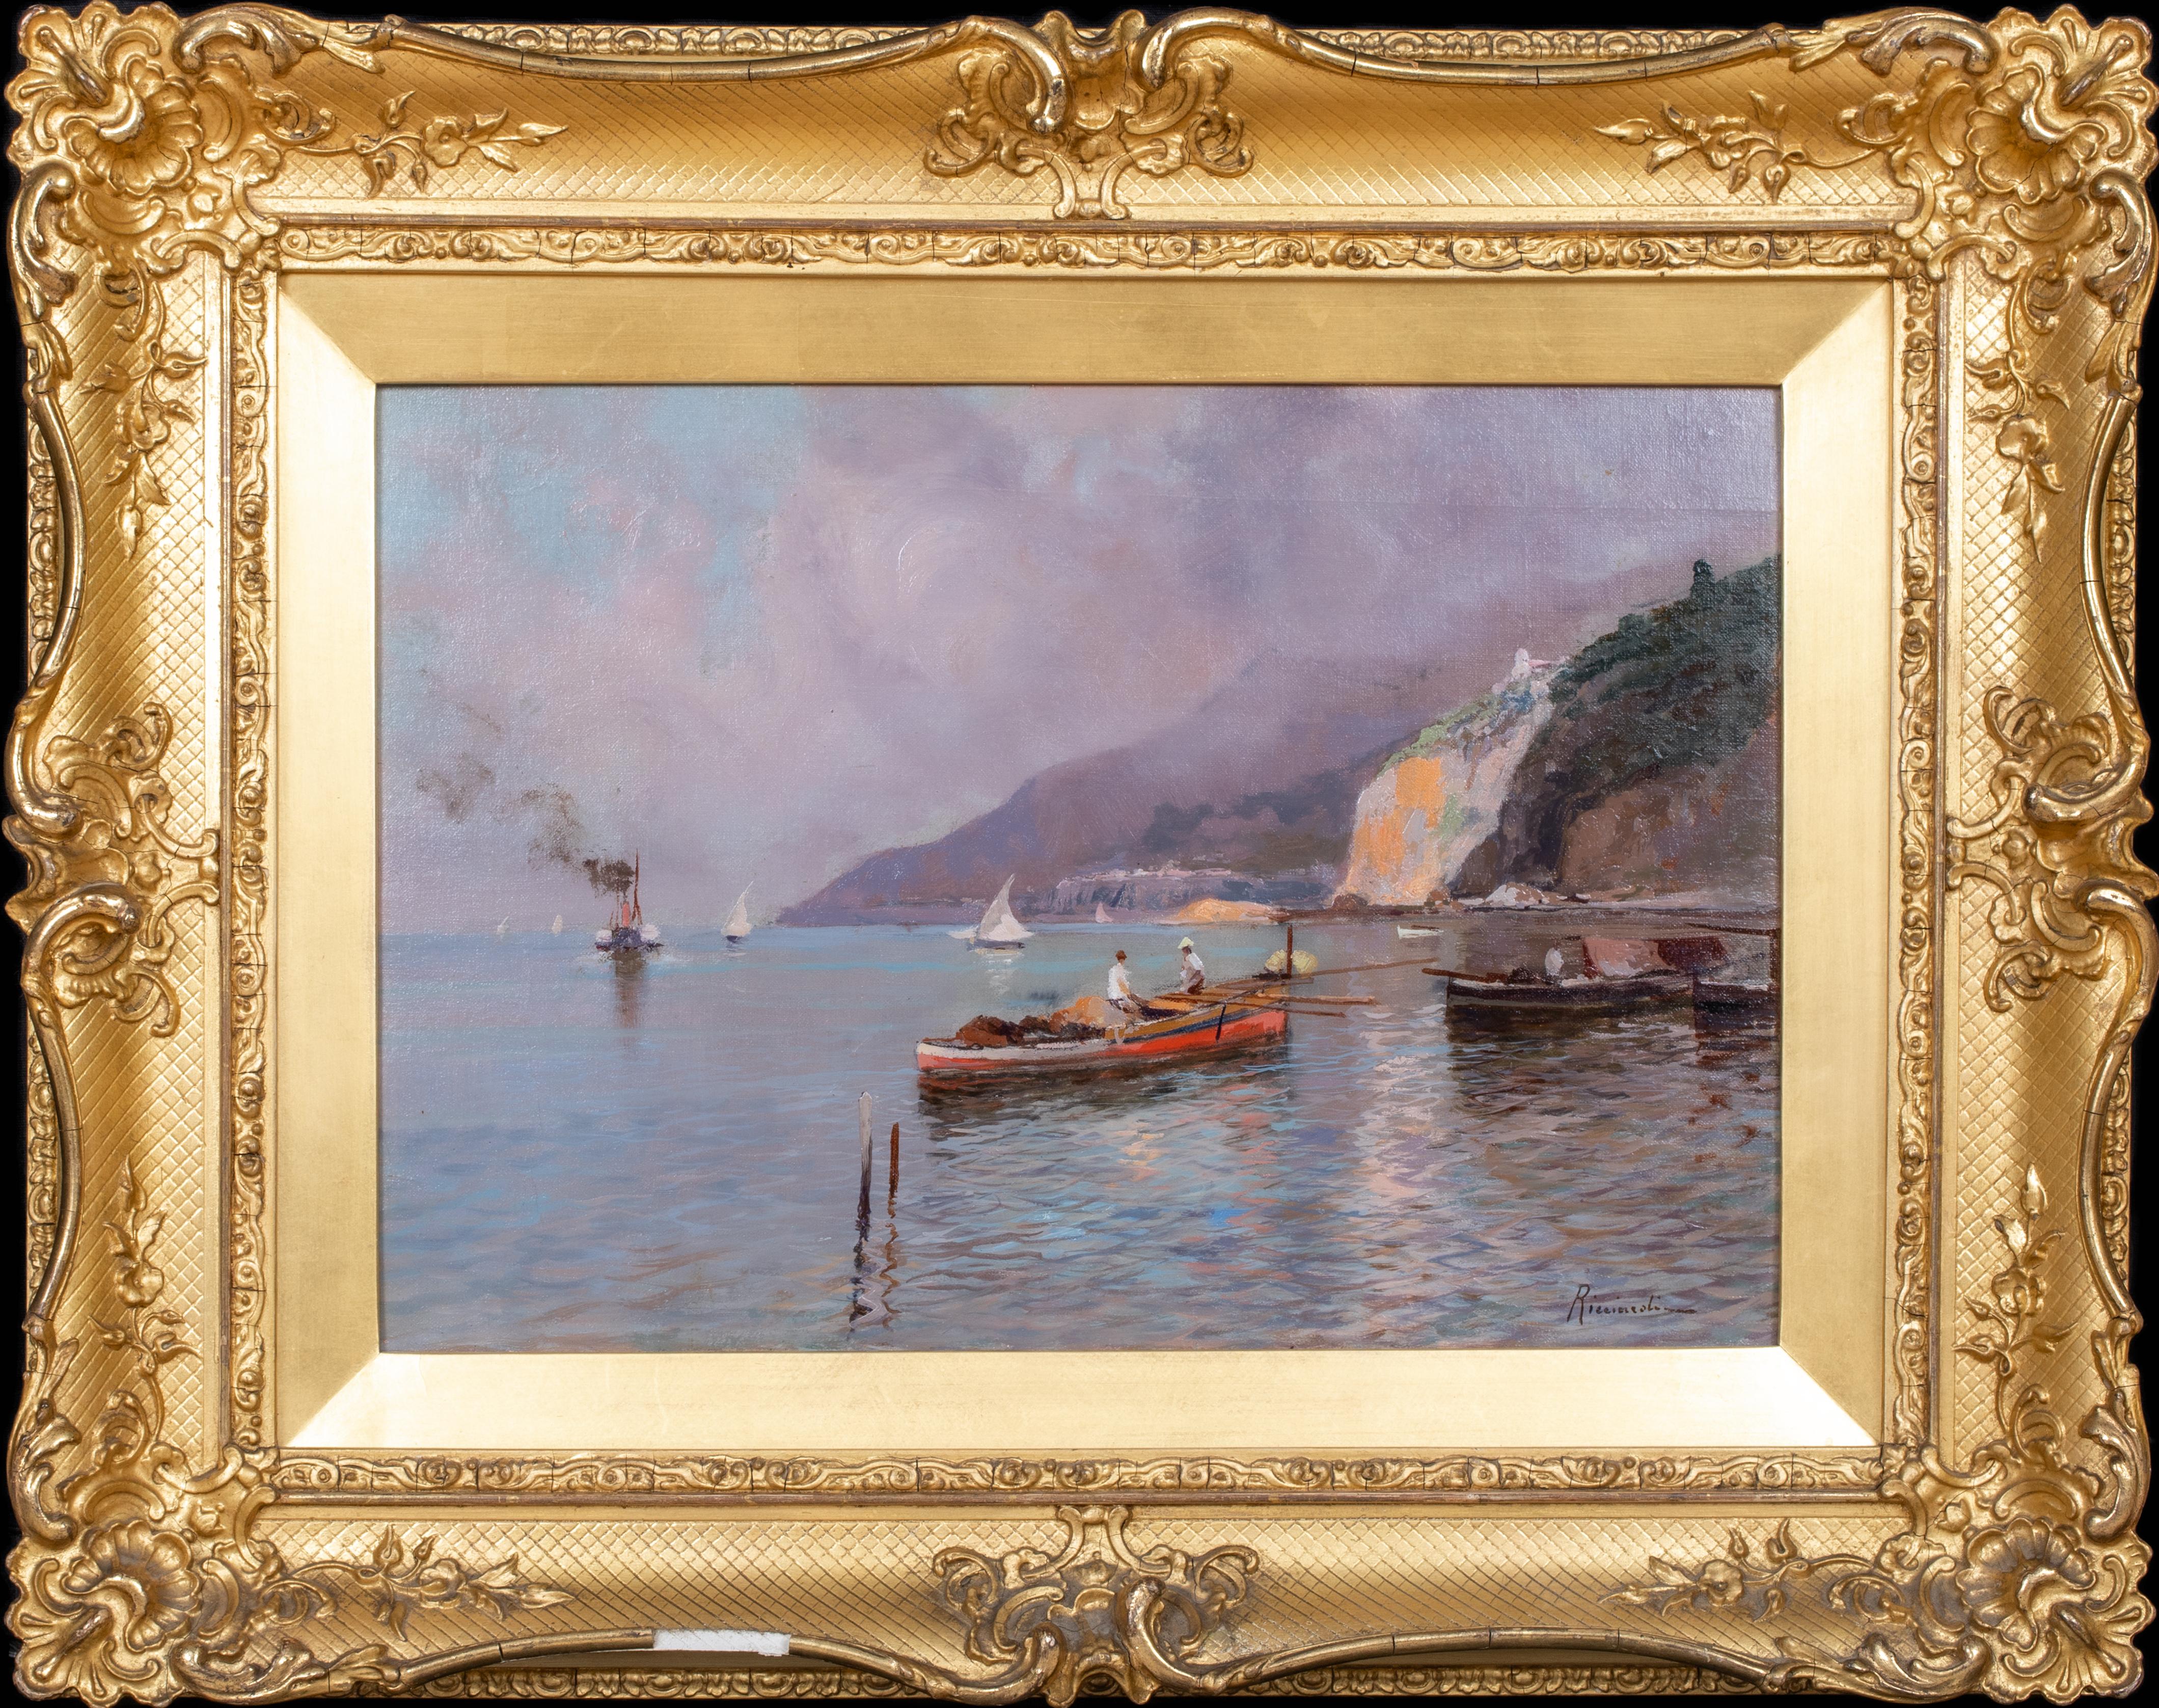 The Amalfi Coast, 19th Century

Oscar Ricciardi (1864-1935) sale to $24,000

19th century Italian sunset view of the Amalfi coast, oil on board by Oscar Ricciardi. Excellent quality and condition example of the prolific painters work capturing and